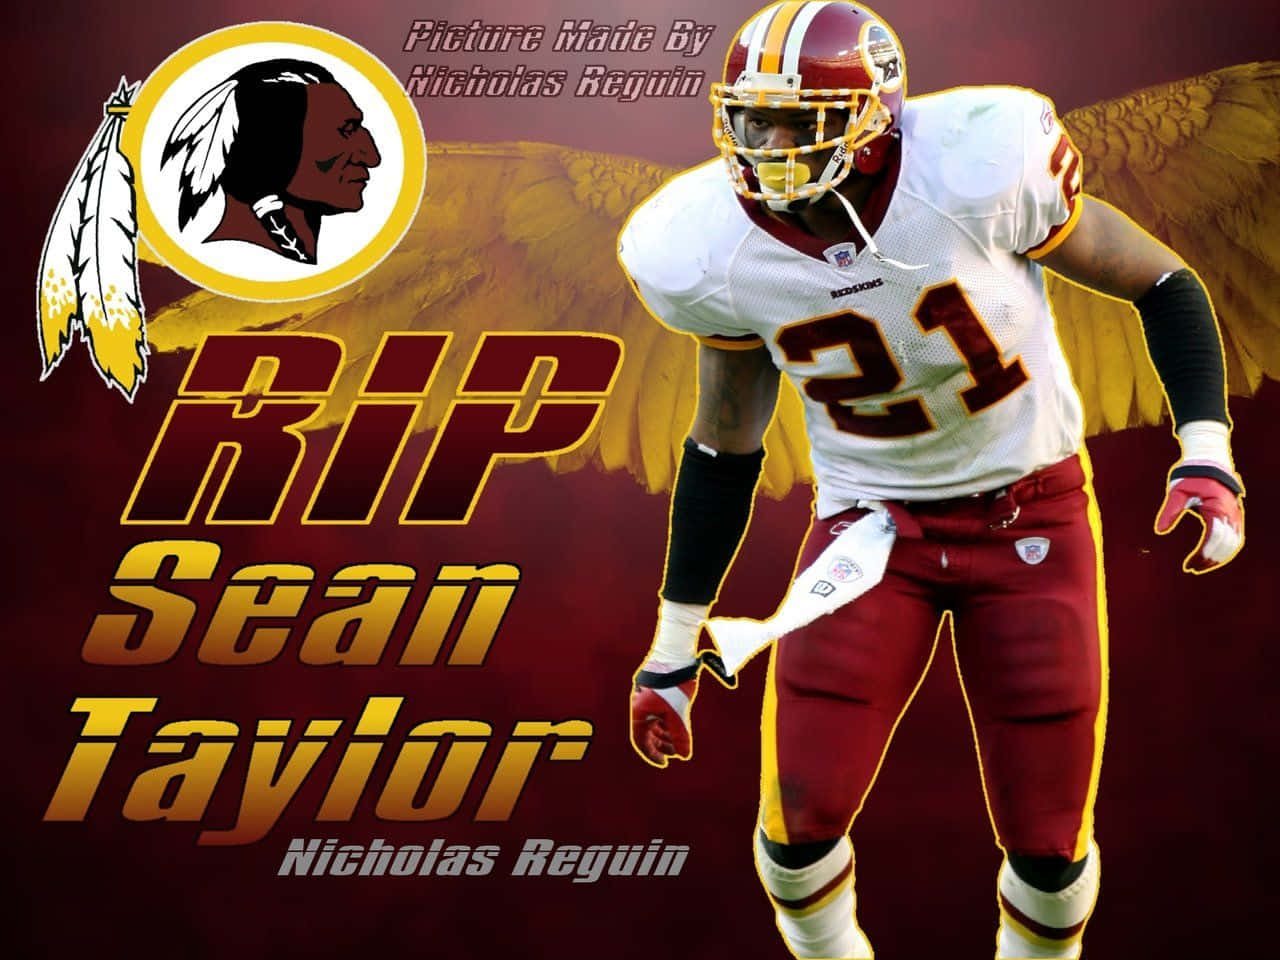 Sean Taylor, retired safety of the Washington Redskins Wallpaper